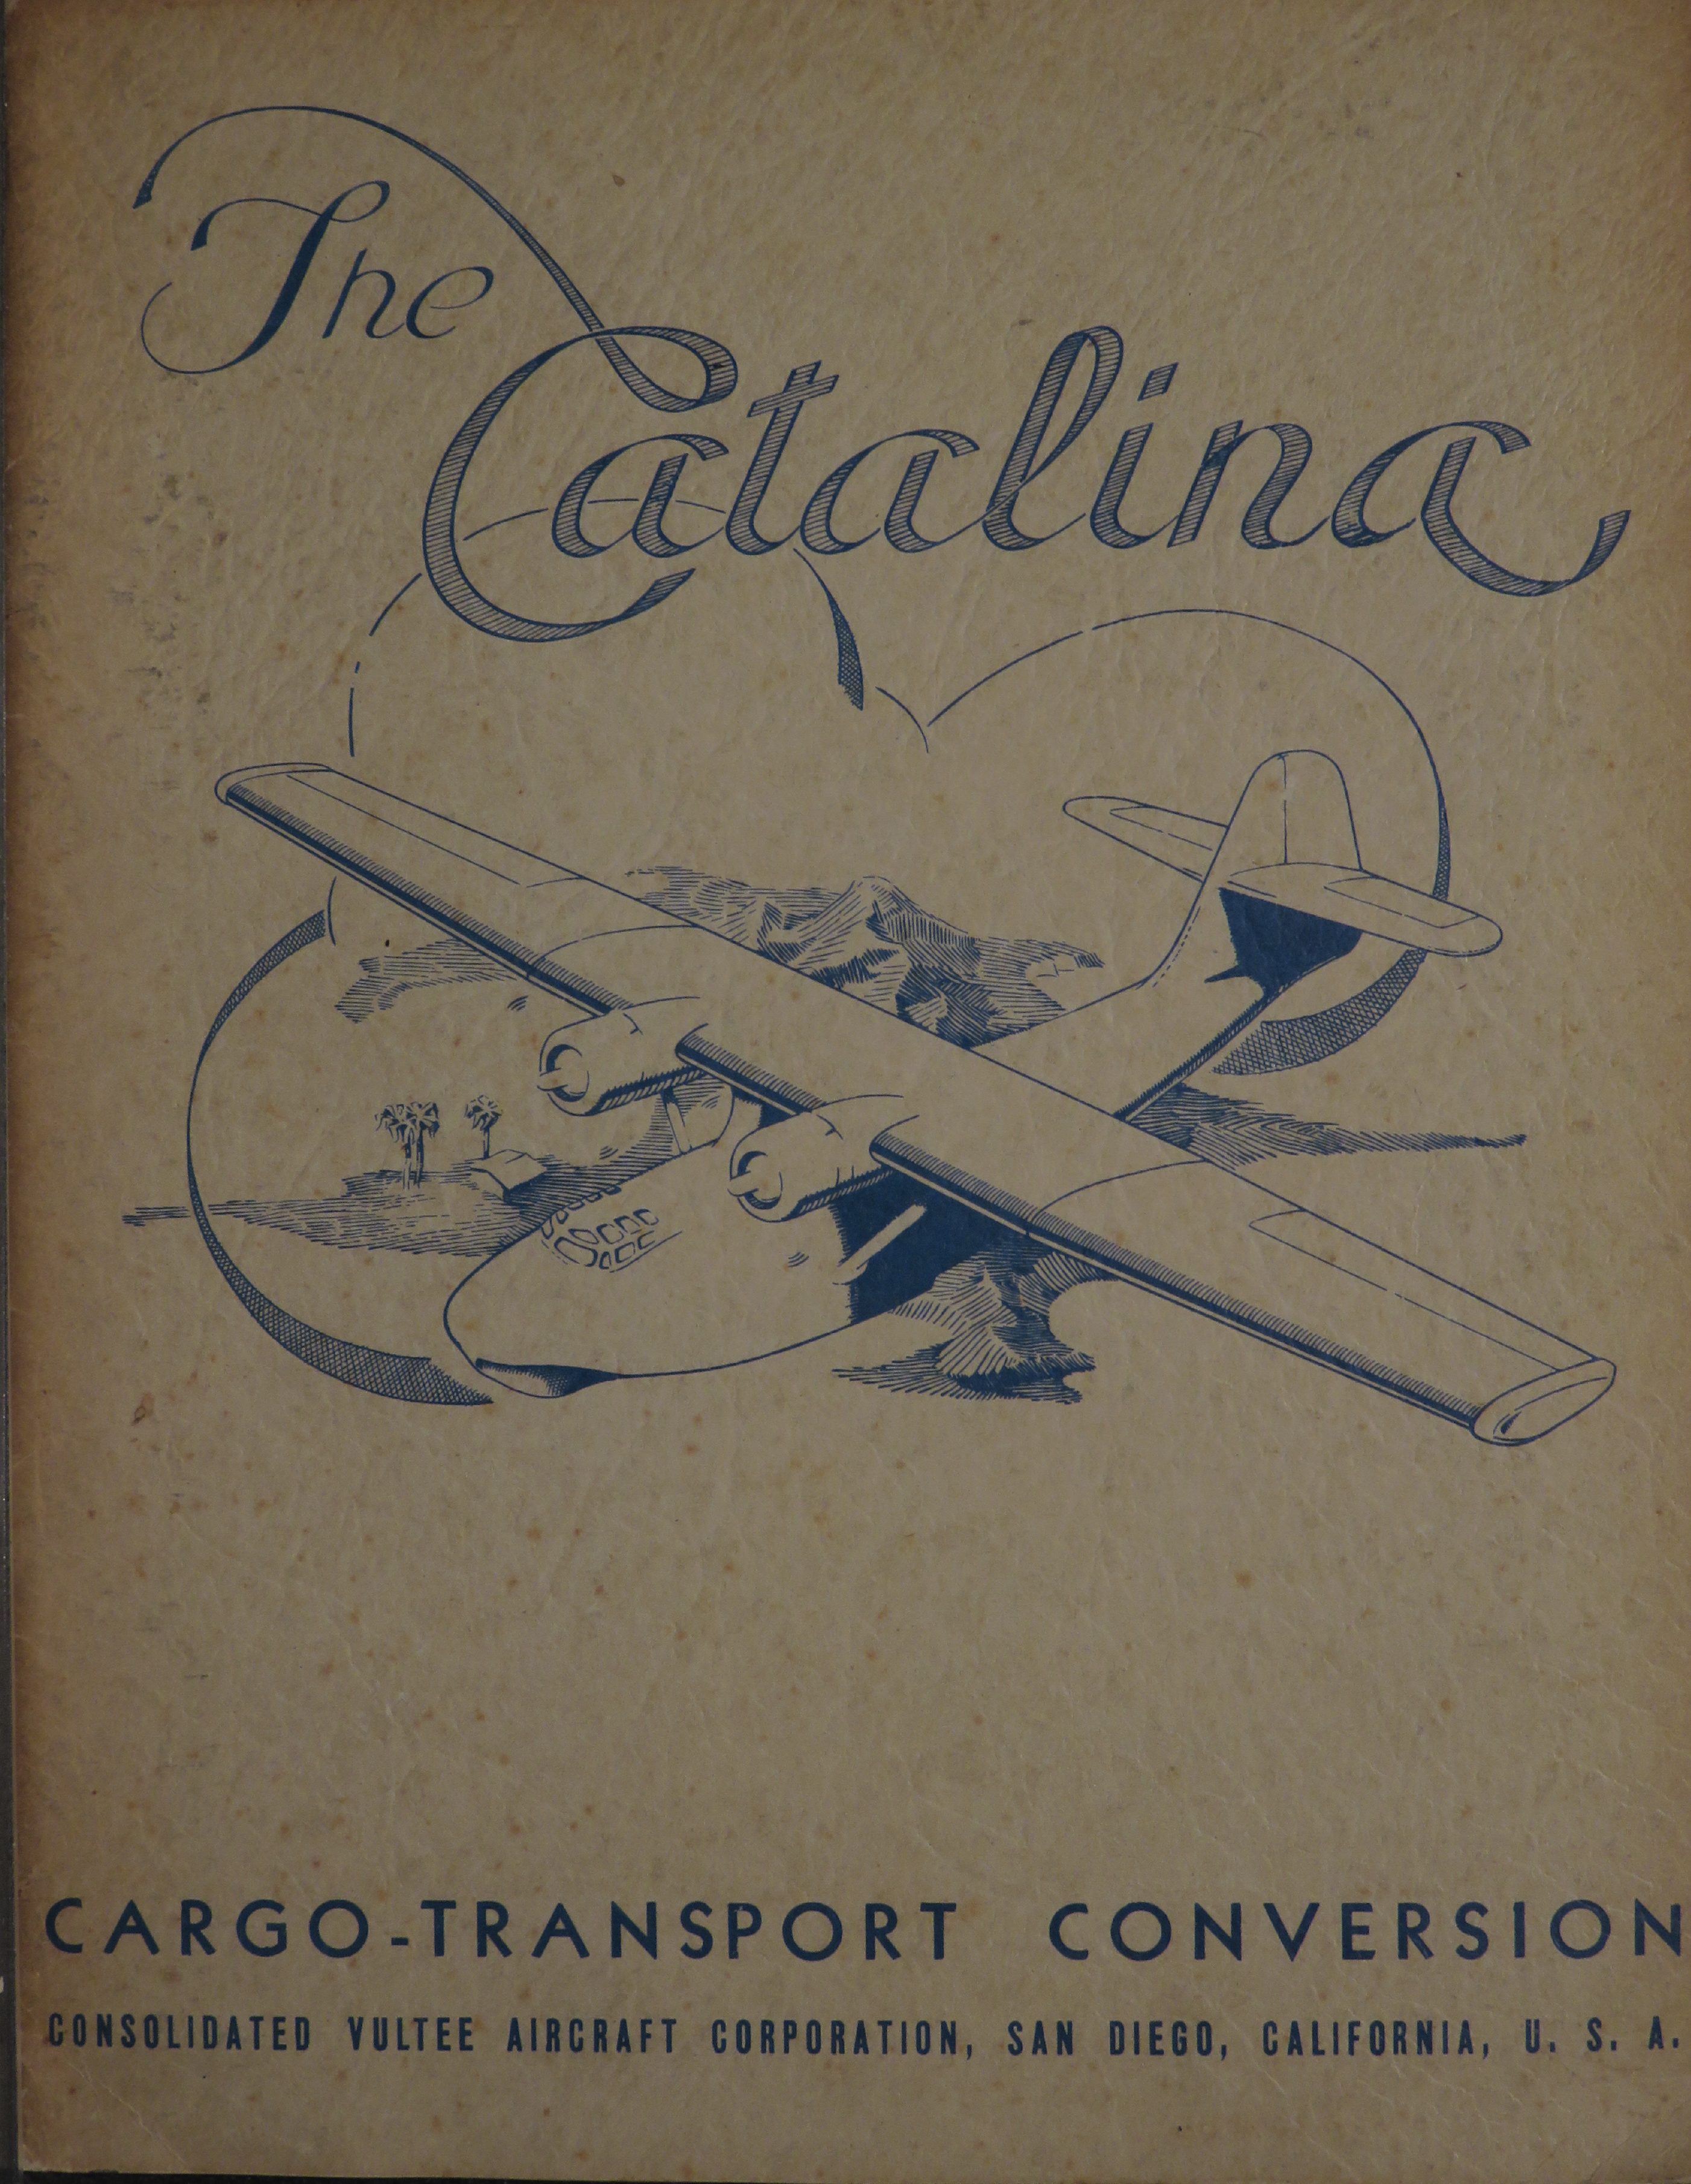 Sample page 1 from AirCorps Library document: The Catalina: Cargo-Transport Conversion